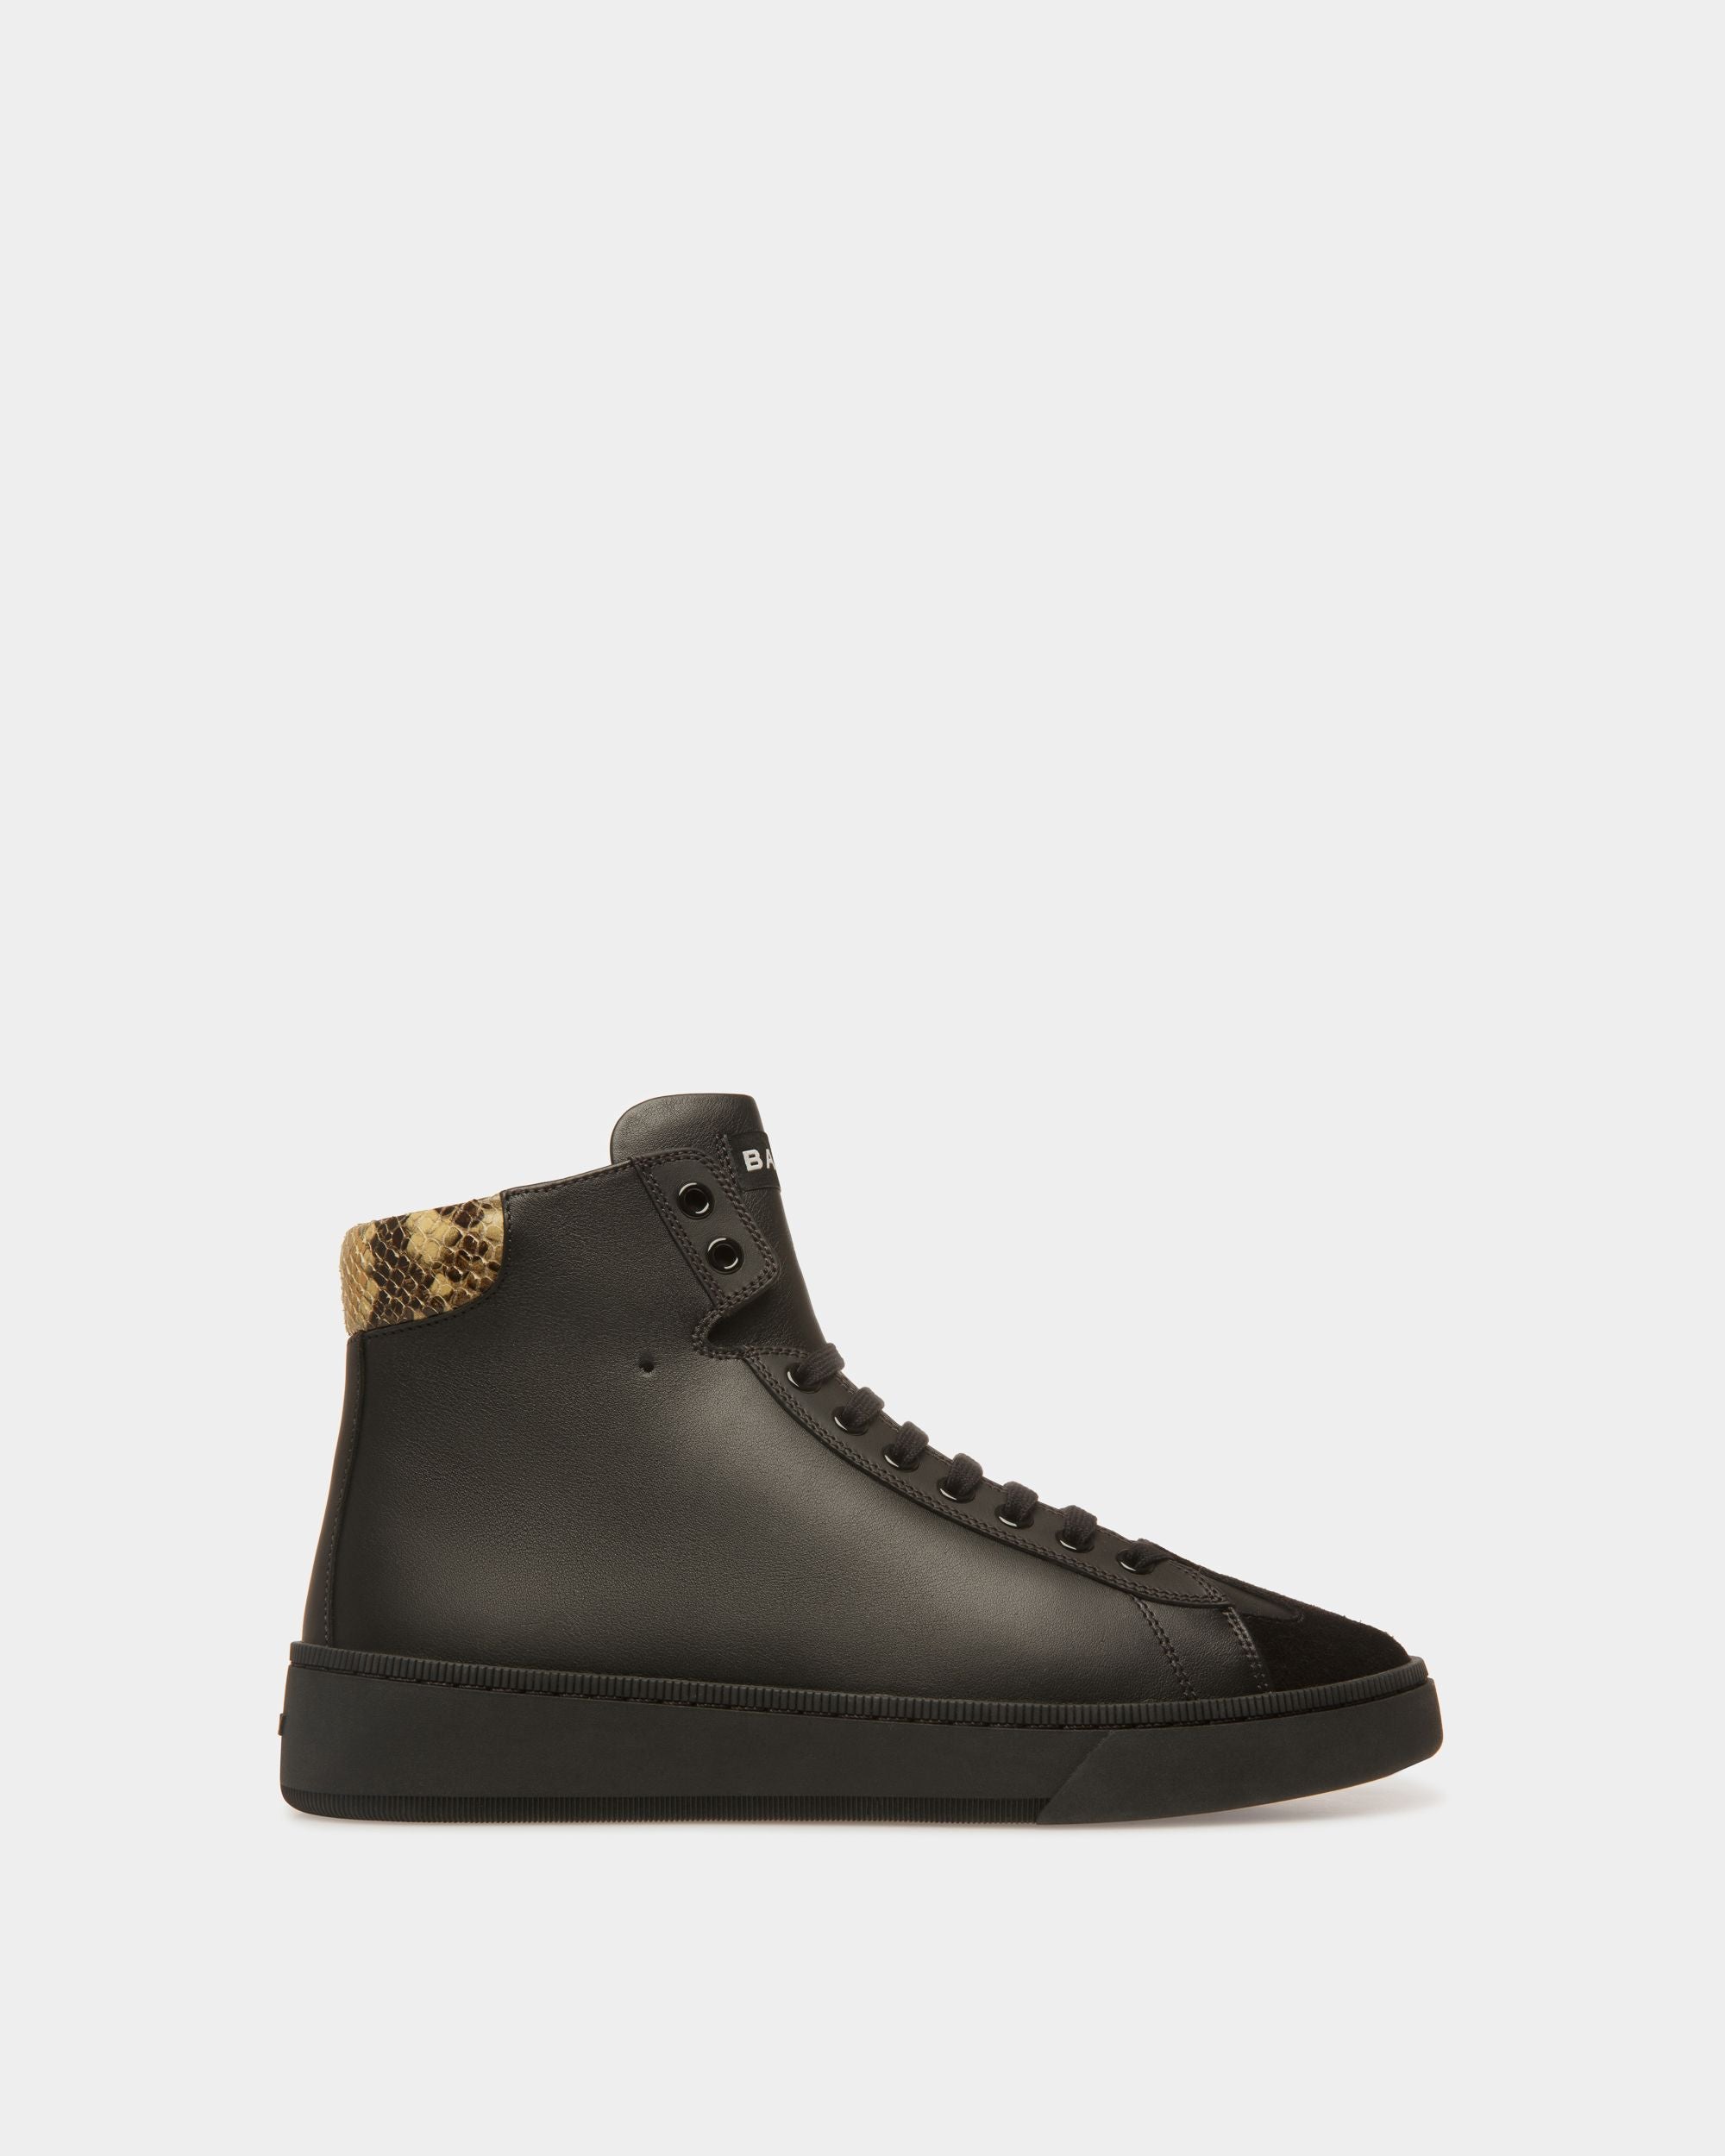 Randy | Men's Sneakers | Black And Python Print Leather | Bally | Still Life Side